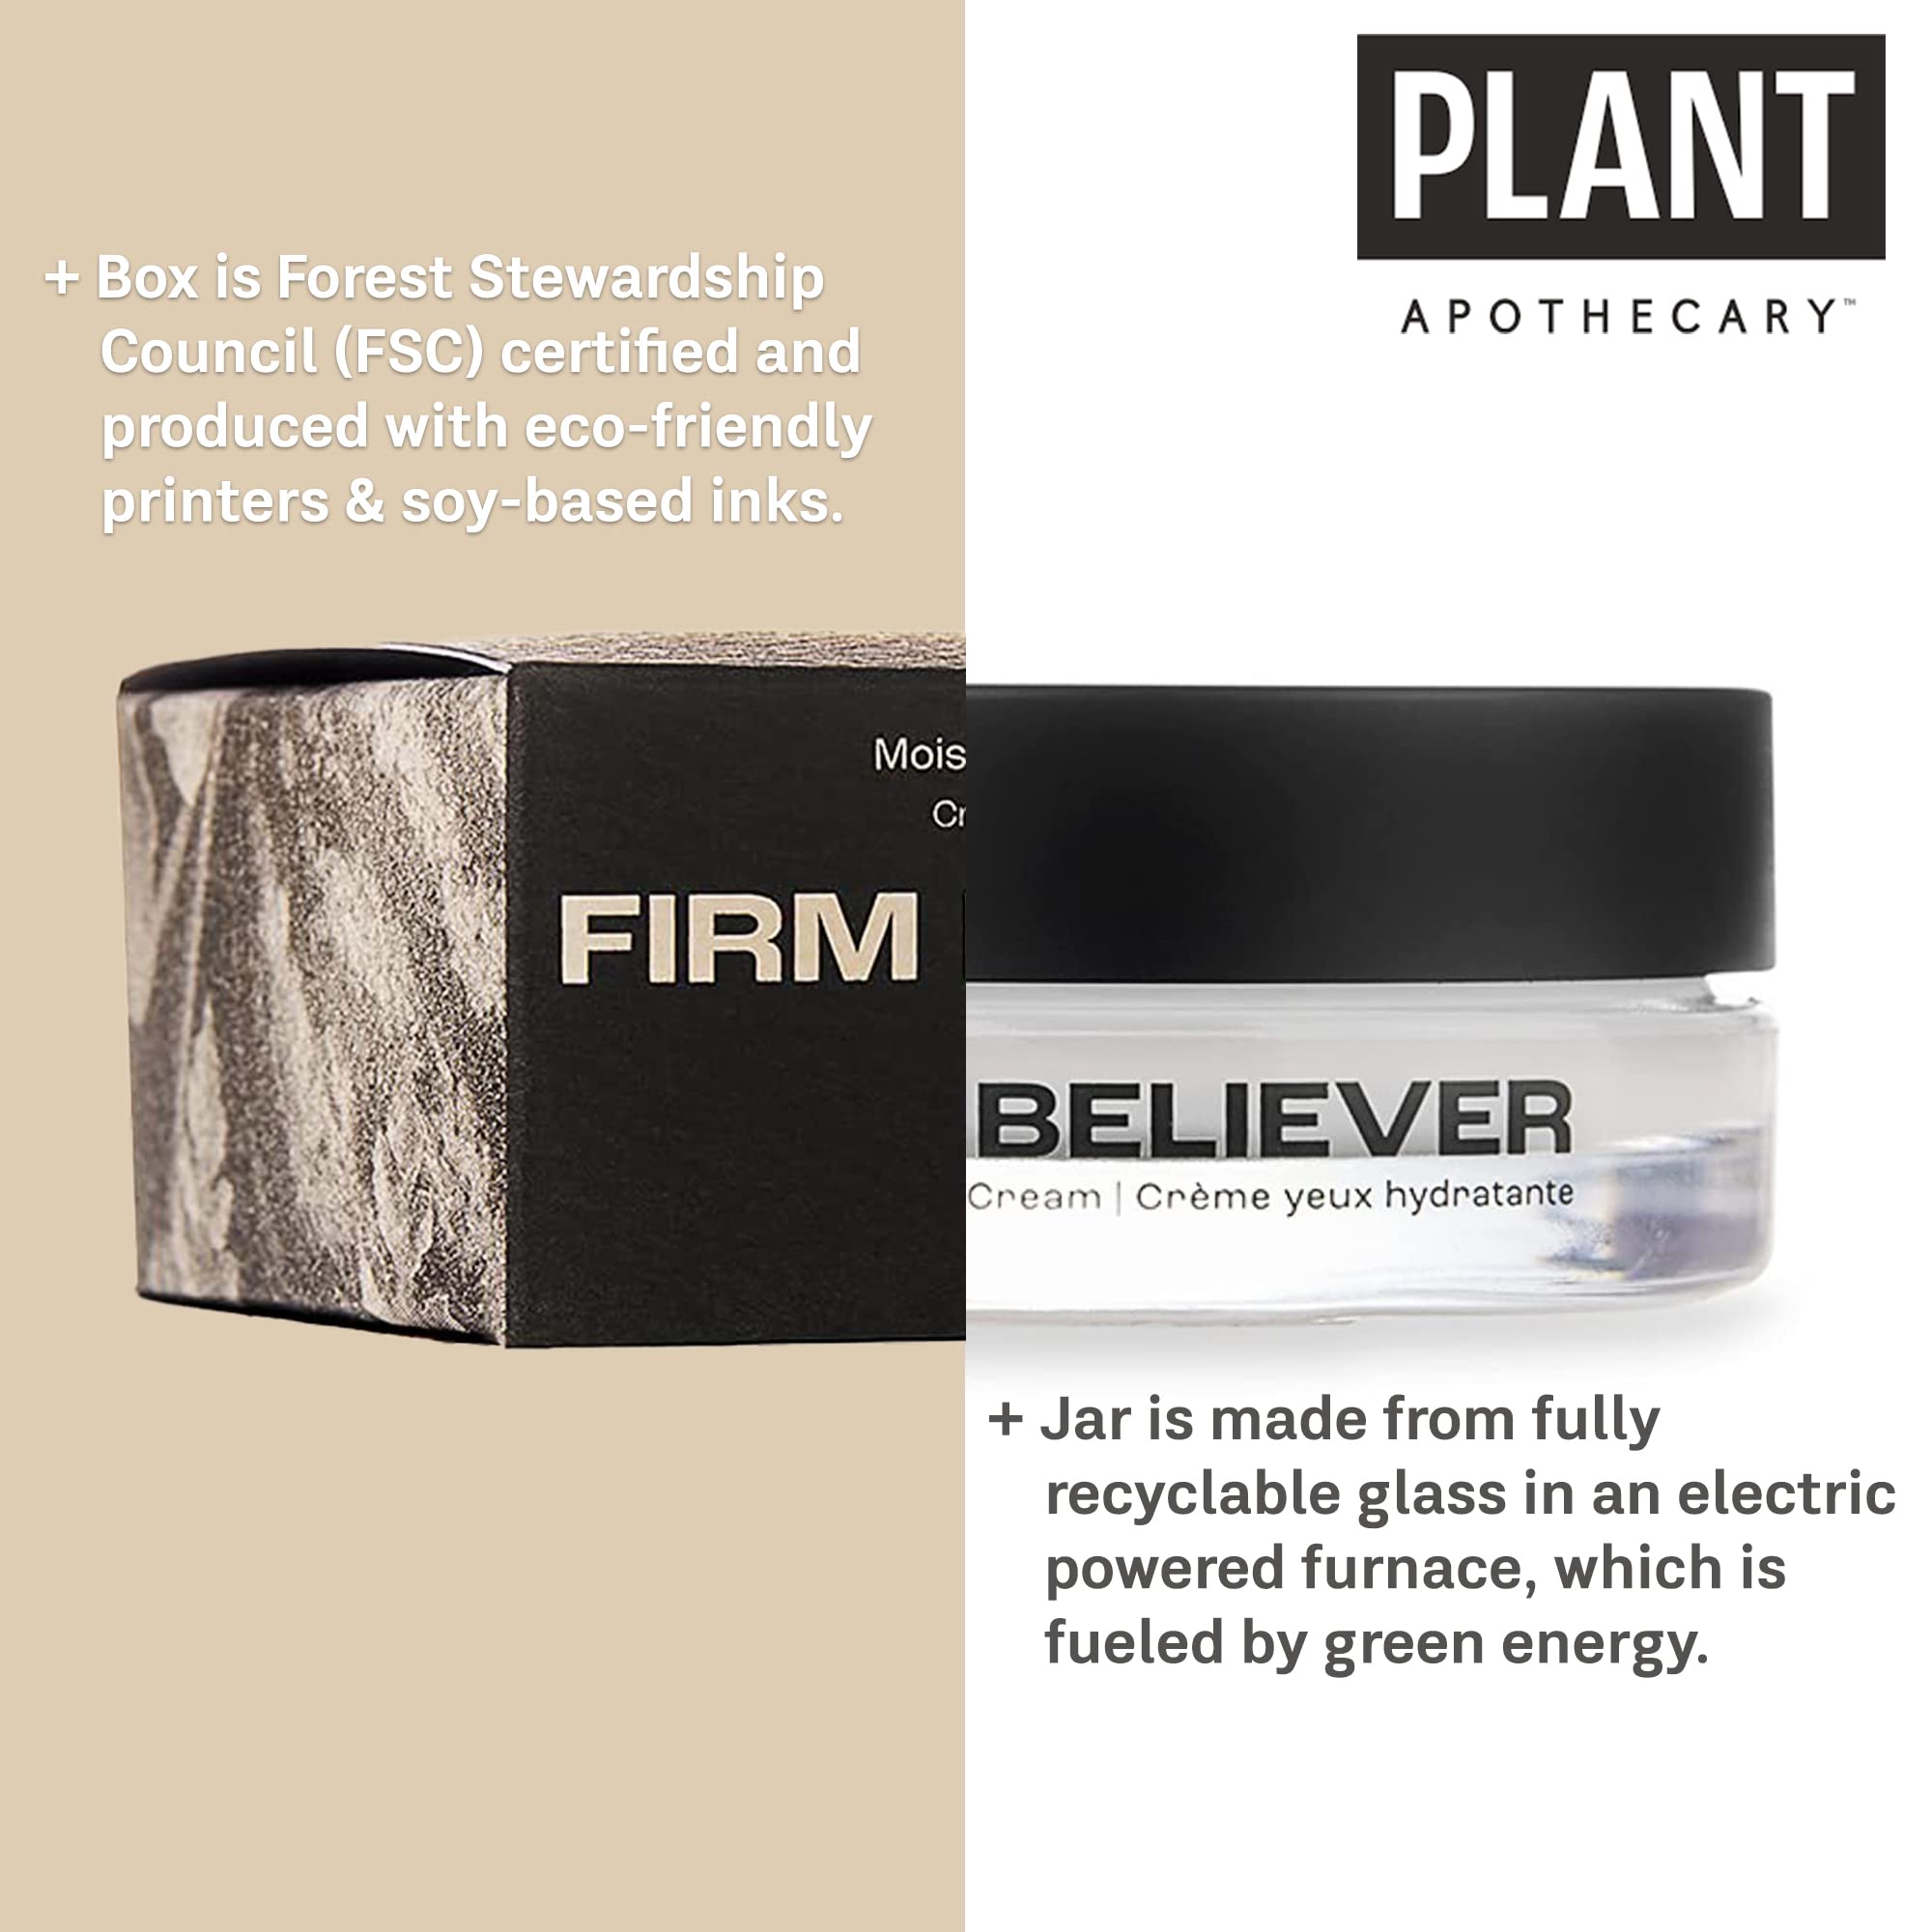 plant apothecary Firm Believer: 30ml Under Eye Cream with Vitamin C - Puffiness, Dark Circles, Eye Bags, Fine Lines and Wrinkles Reducer - Anti-Aging Eye Creams and Skin Care for Men and Women